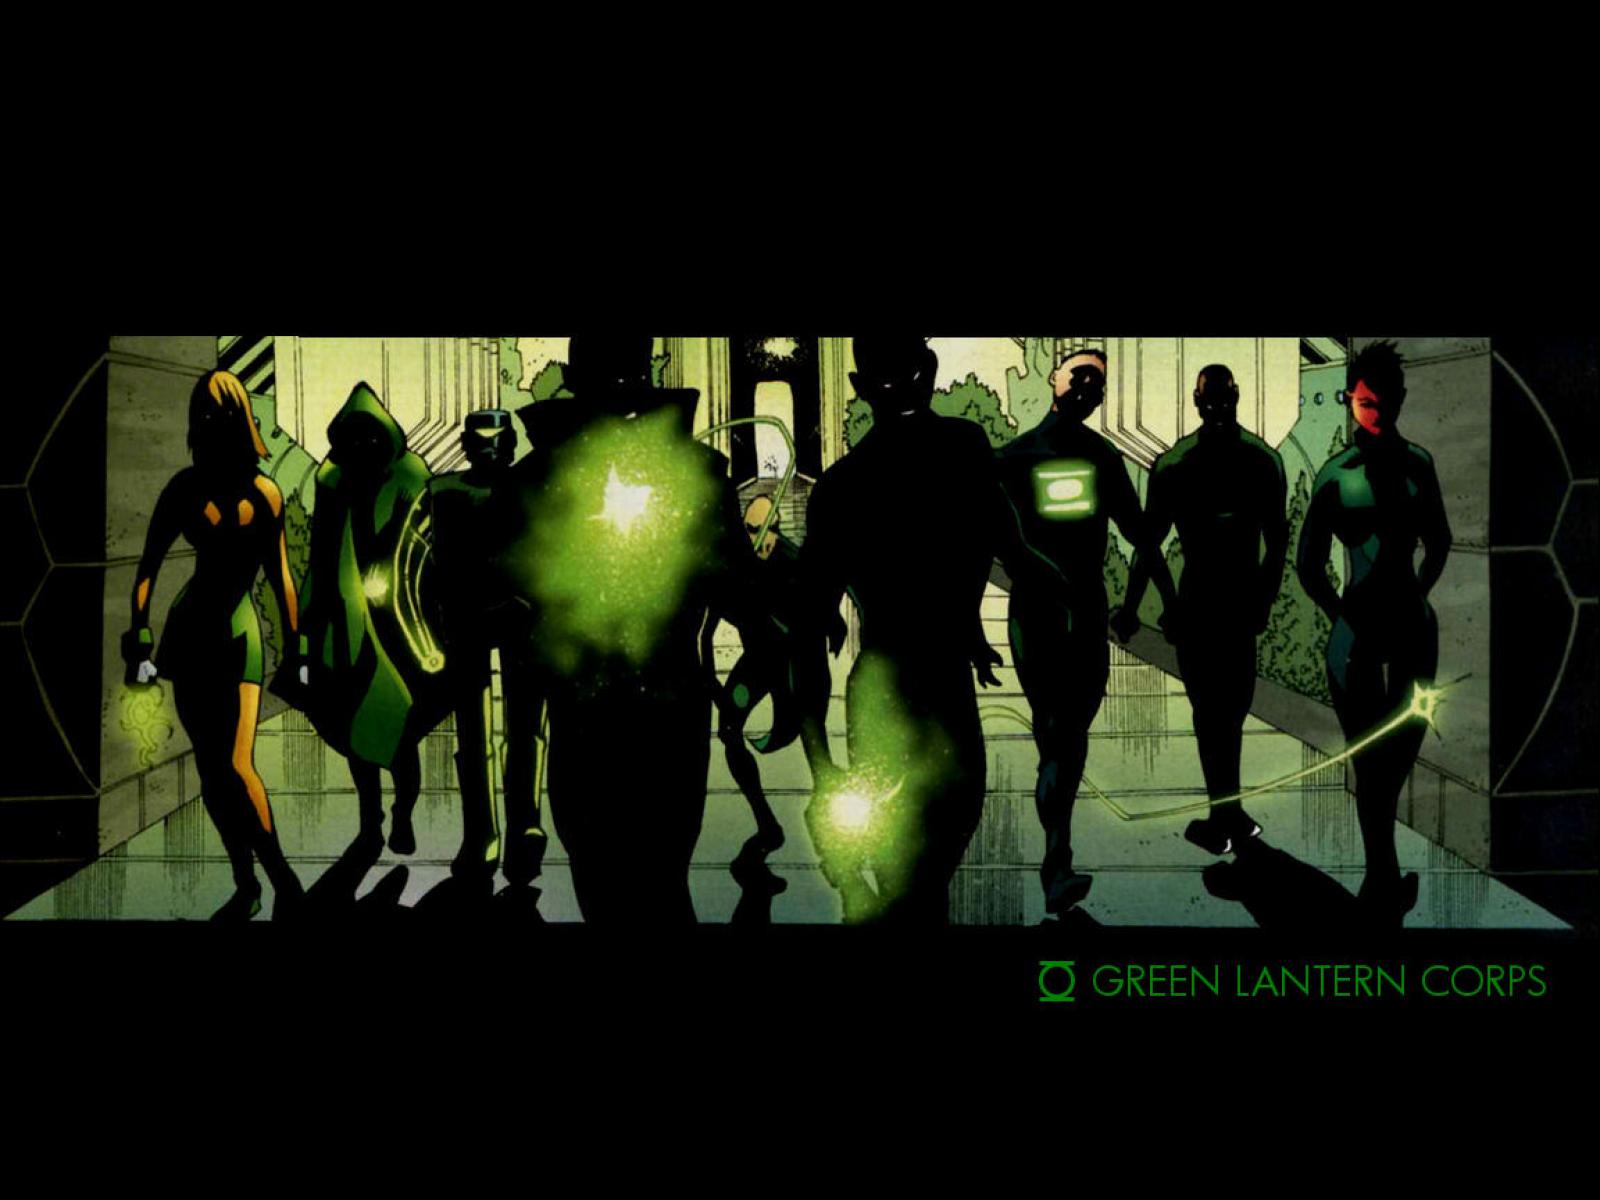 The Green Lantern Corps Images The Team Hd Wallpaper - Poster - HD Wallpaper 